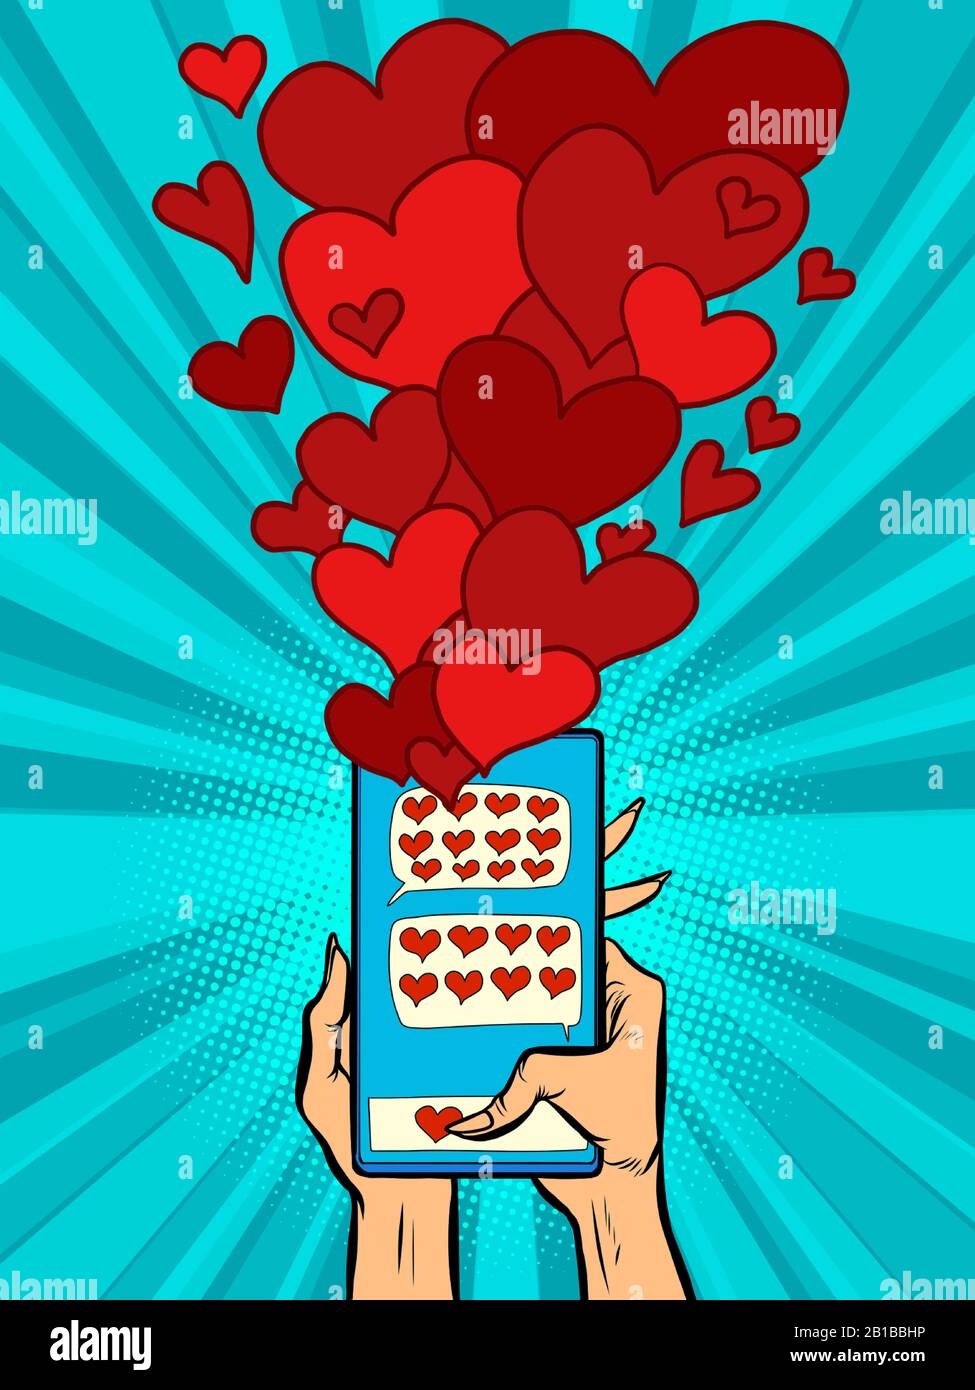 phone hearts. social networks sympathy connections Stock Vector